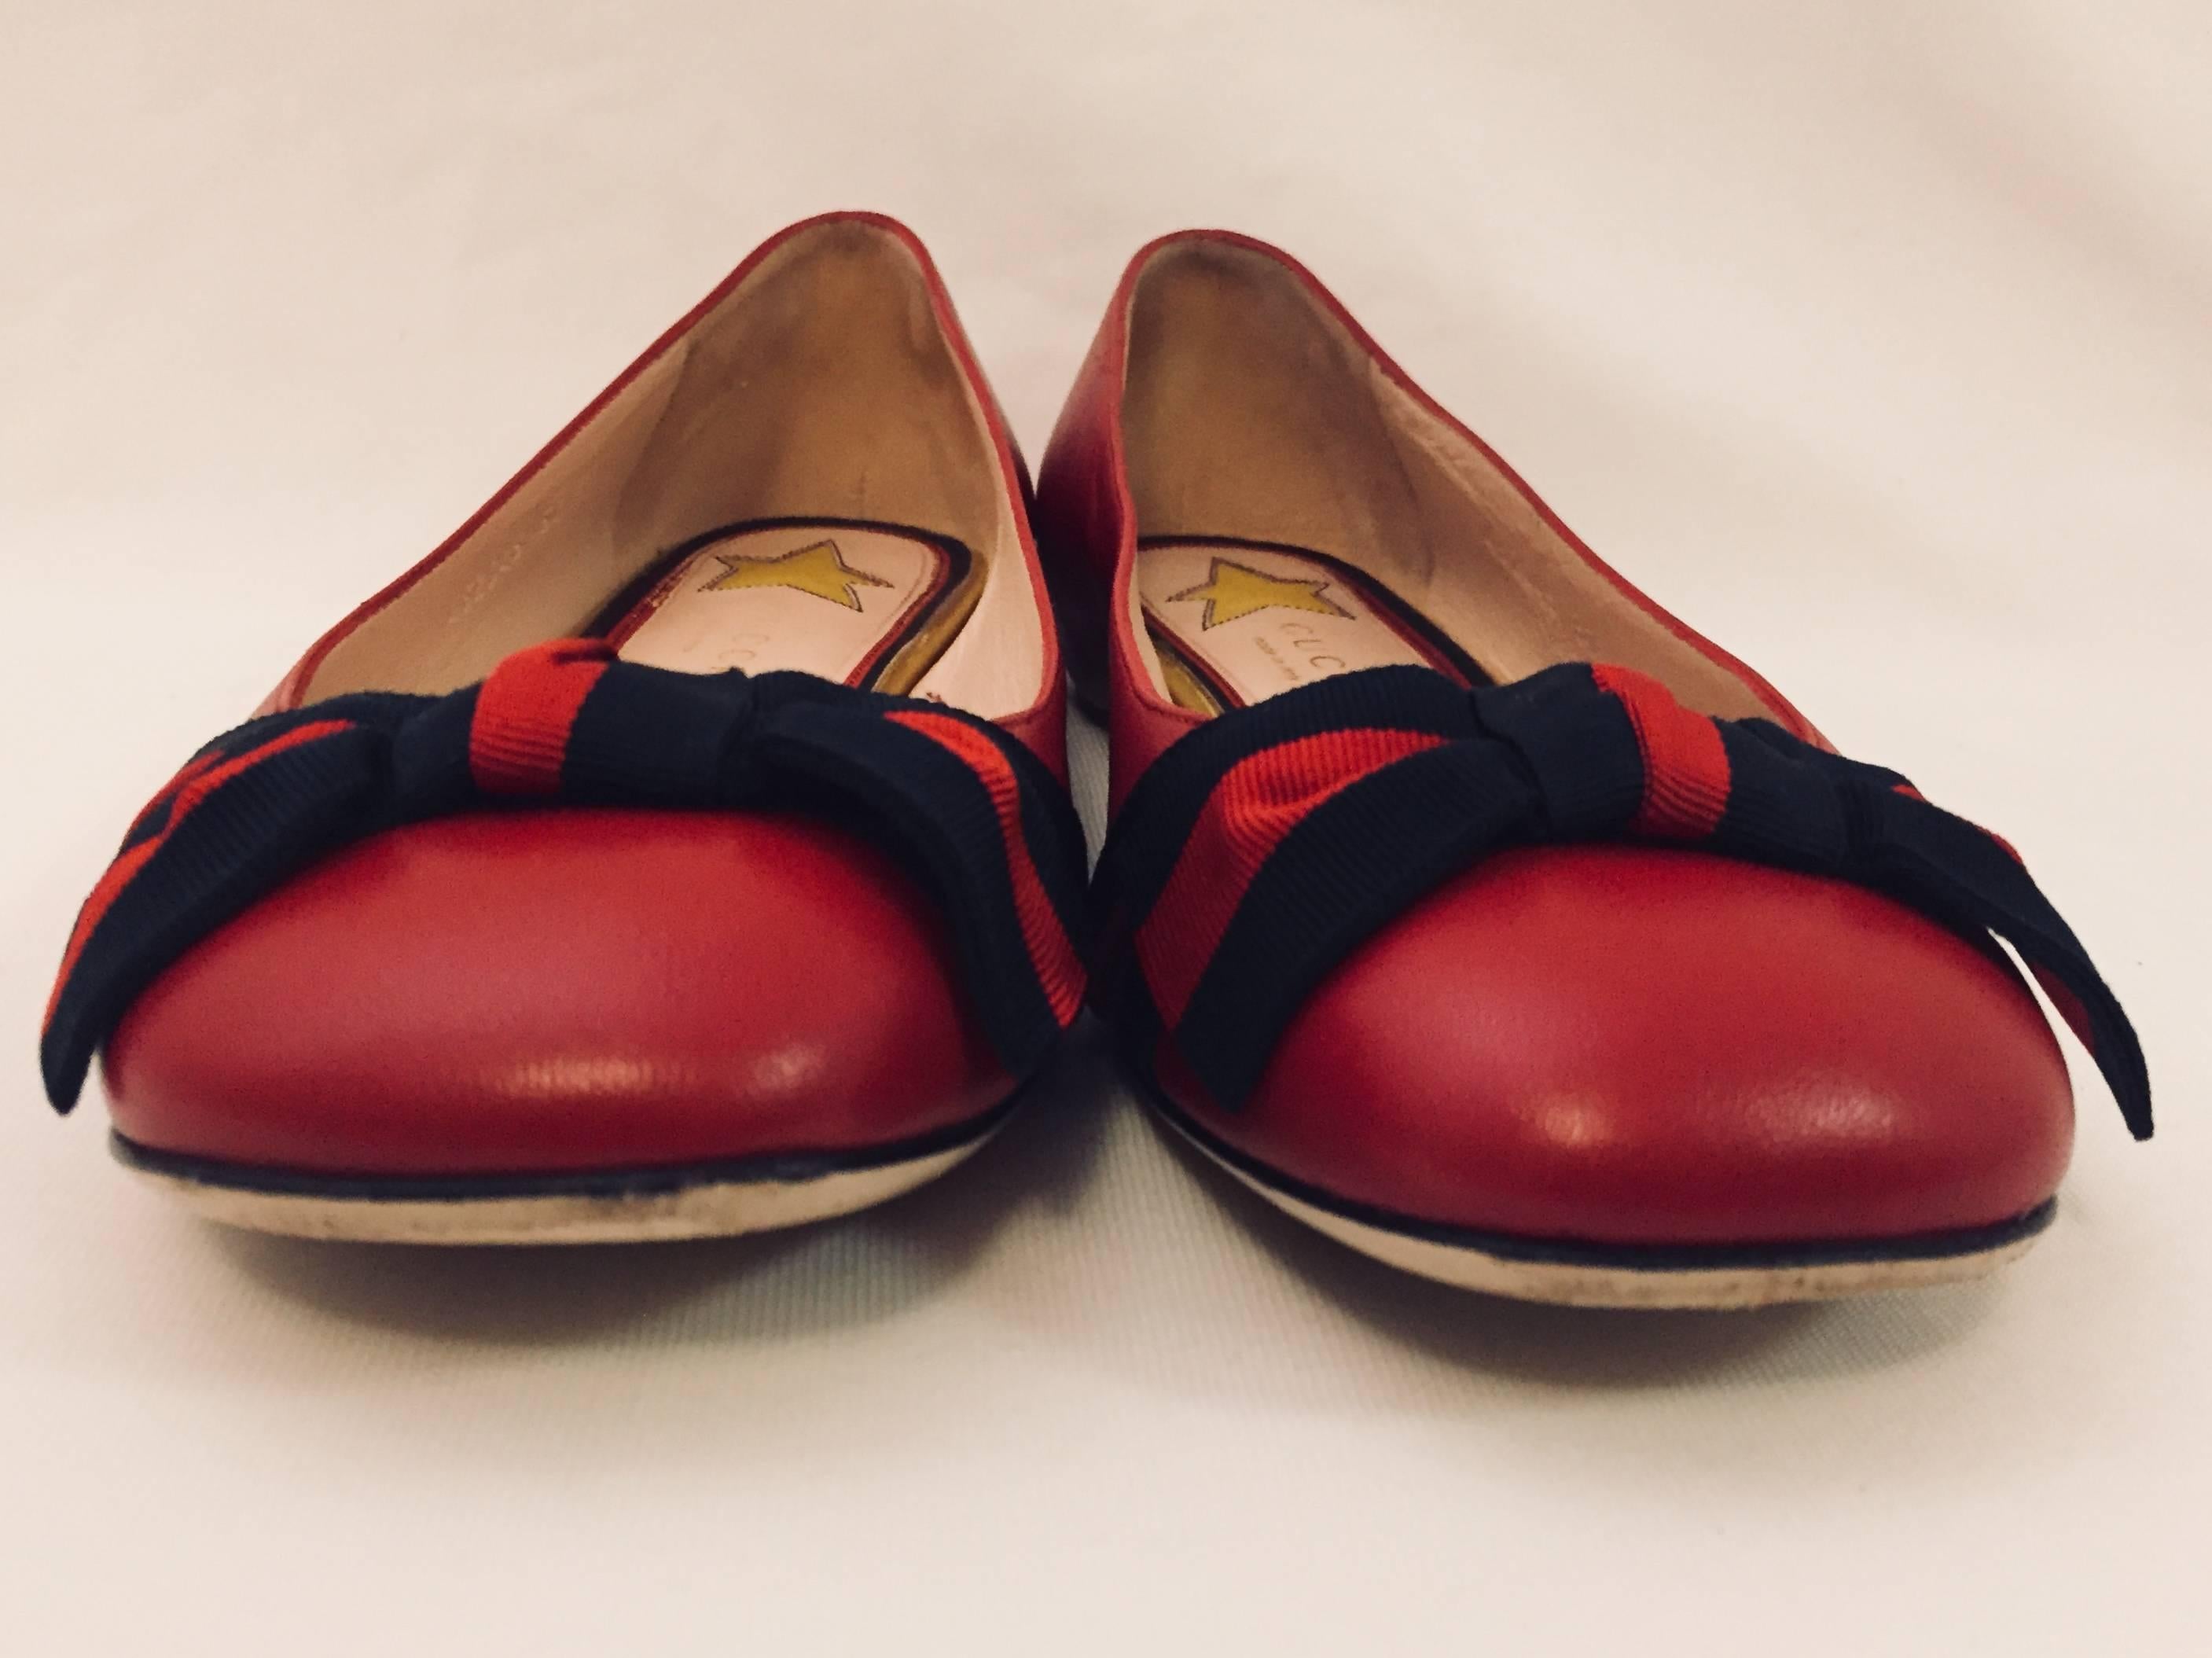 Be a star in these Gucci round toe ballet flats!  Features exquisite leather, navy and red striped grosgrain 